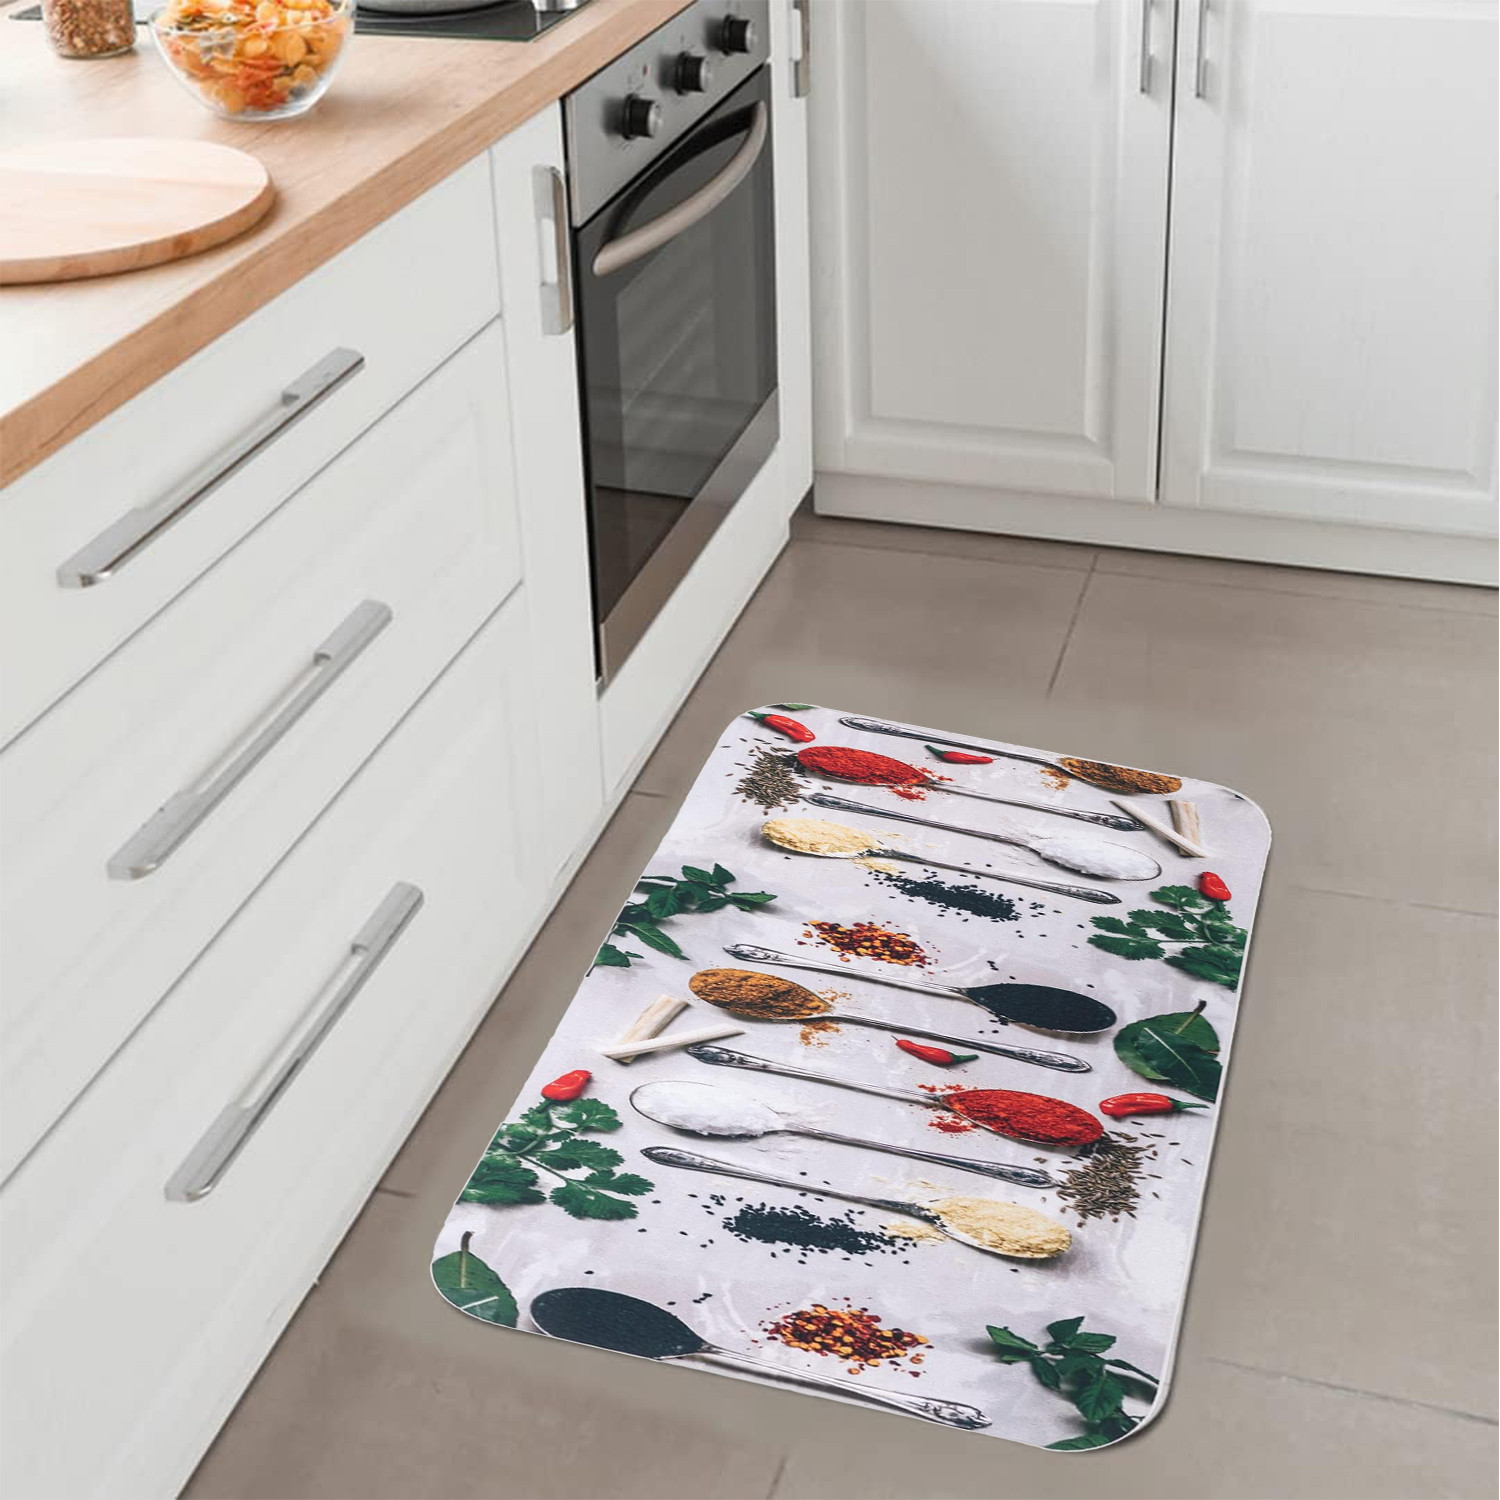 Kuber Industries PVC Kitchen Floor Mat|Anti-Skid Backing|Mats for Kitchen Floor |Easily Washable|Idol for Home, Kitchen Entrance| CF-220817 | Multi